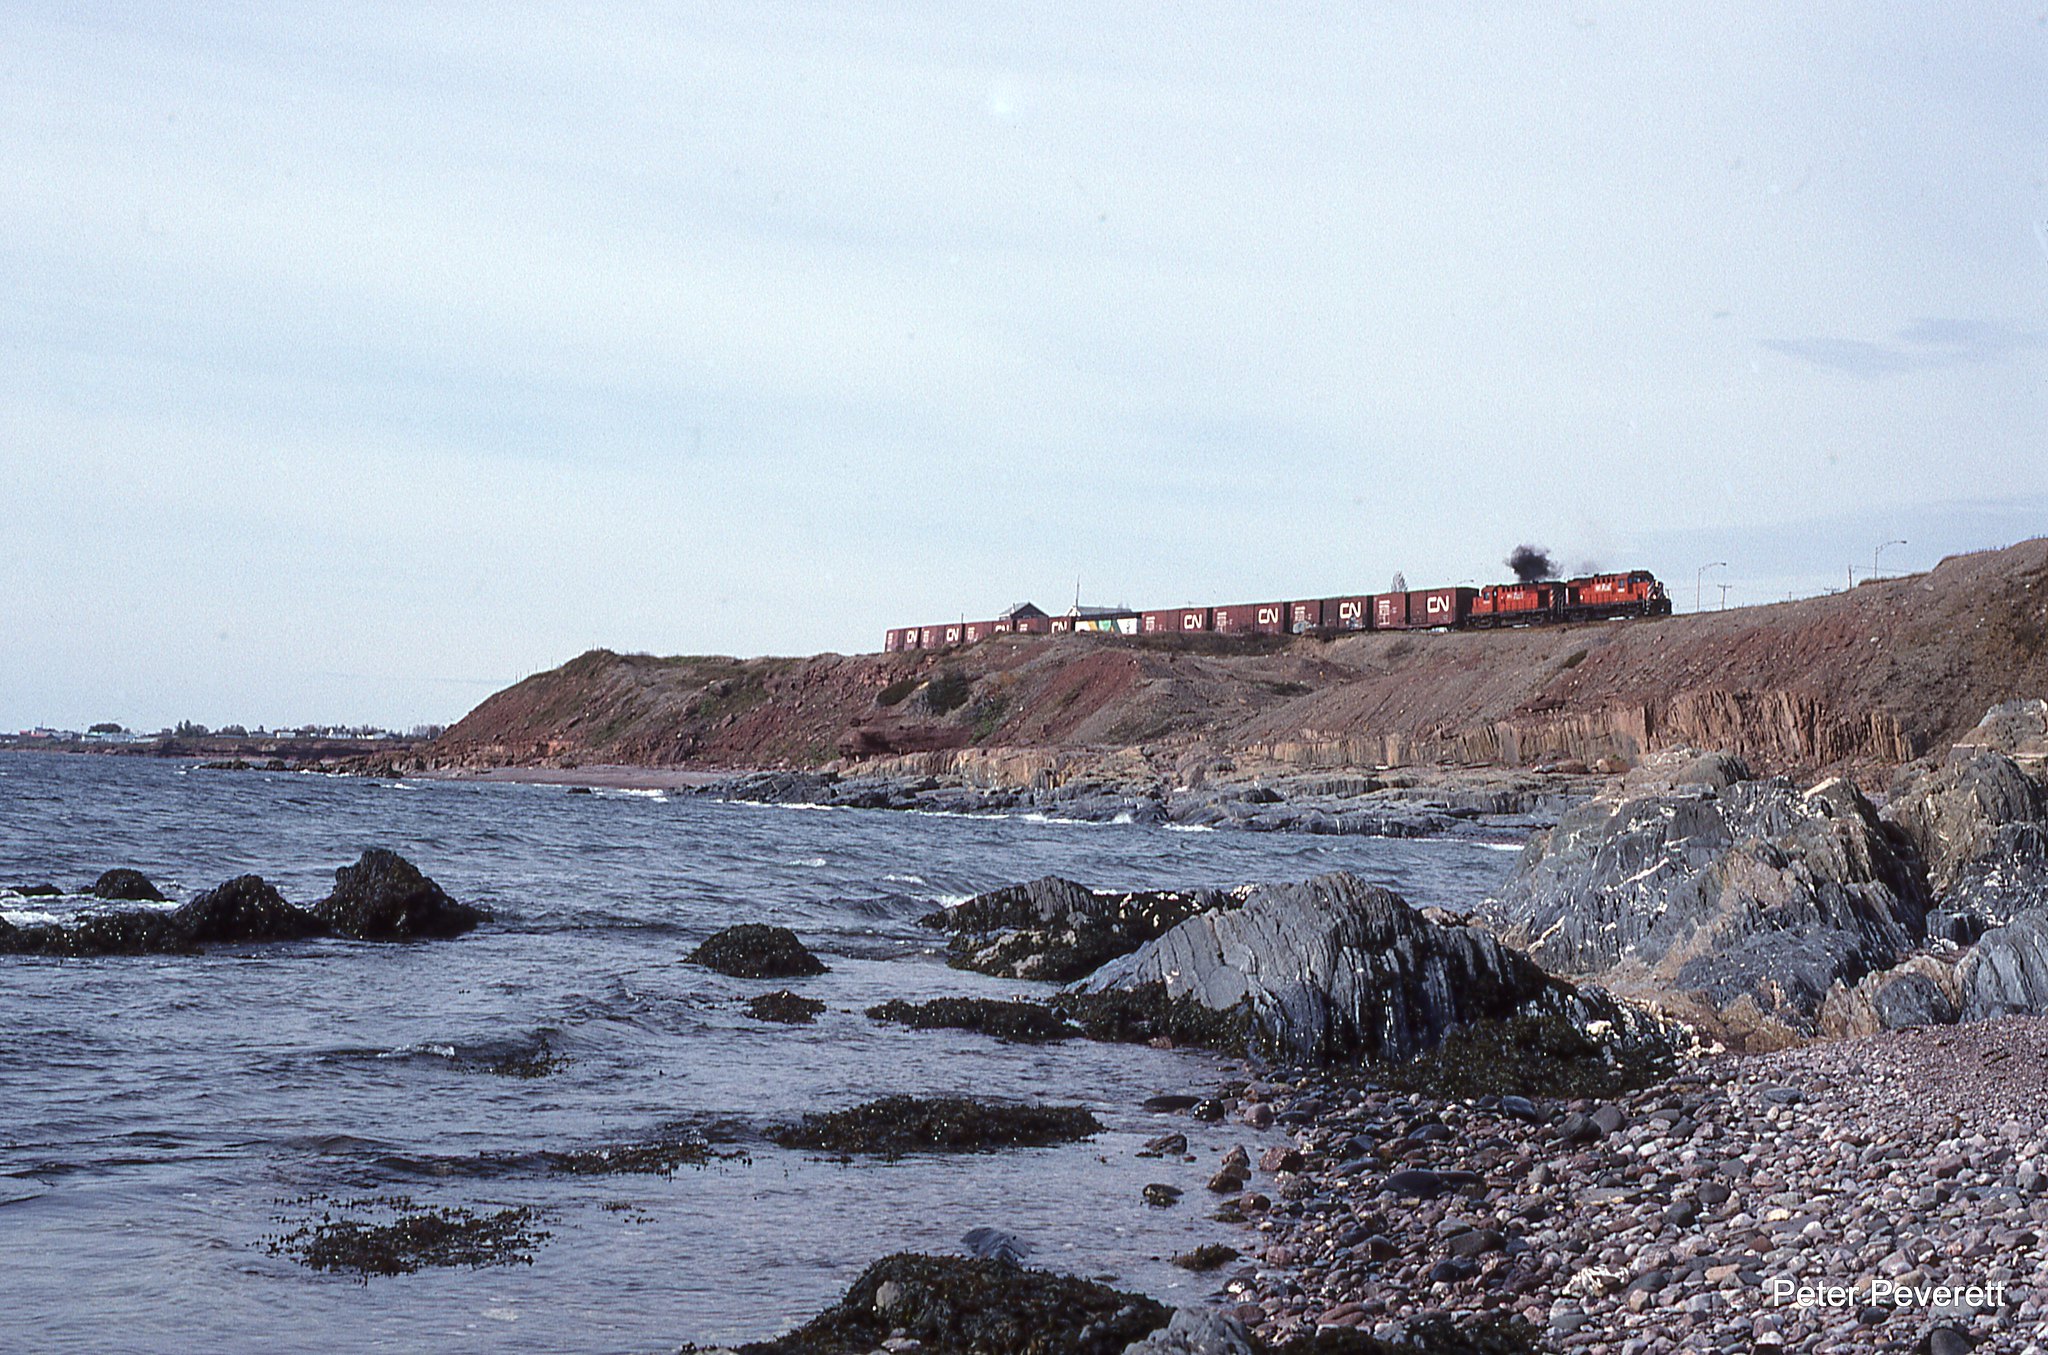 NBEC RS-18 # 1868, 1840 on Train 592 is seen on the edge of Chaleur Bay at 1105 AM Oct. 4, 2000 at St.Therese-de-Gaspe, Quebec. In 1950 mining started in the town of Murdochville. Raw ore finished with a end product of pure copper anode. By 1999 the mine closed and the last of the copper was being loaded into CN box cars in Gaspe.  The Town of Murdochville went from a population of 5,000 in the 1970s to 764 people by 2011.  One of only a couple of inland towns on the Gaspe peninsula and several miles from anything the town has had to fight to survive.   